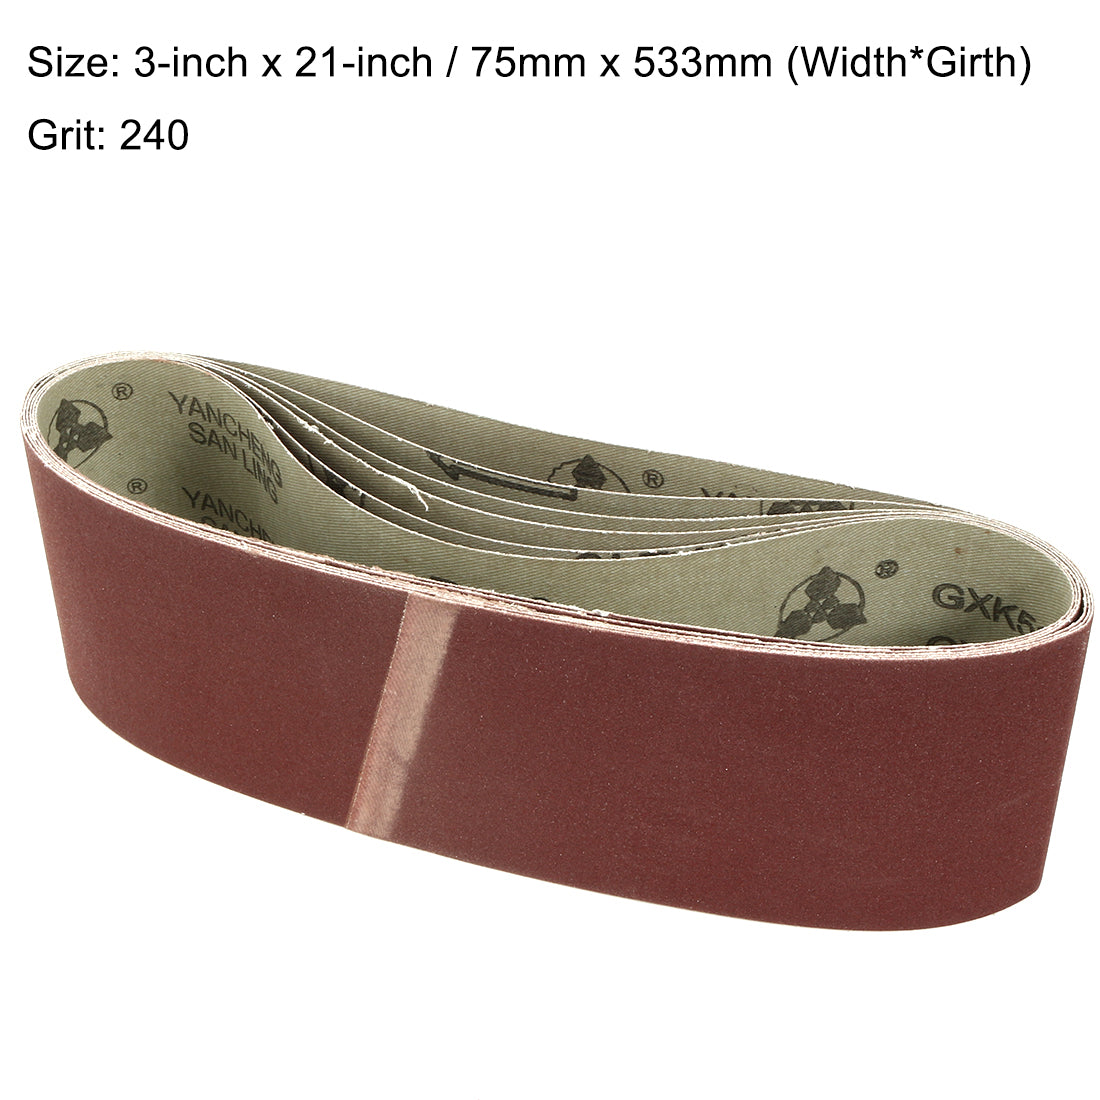 uxcell Uxcell 3-Inch x 21-Inch Aluminum Oxide Sanding Belt 240 Grits Lapped Joint 6pcs